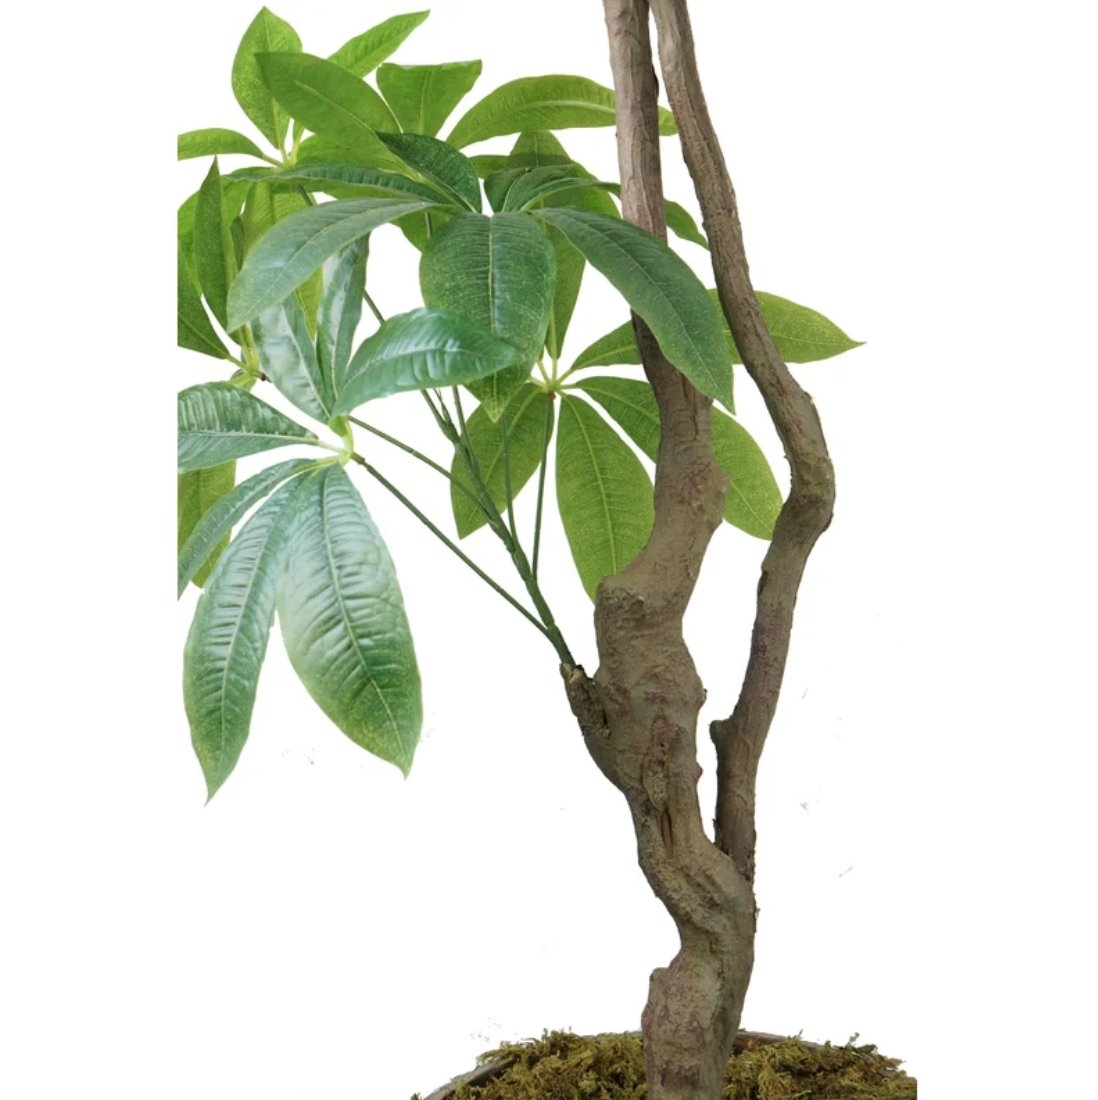 72" H Real Touch Indoor/Outdoor Pachira Aquat Tree in Planter - Image 1